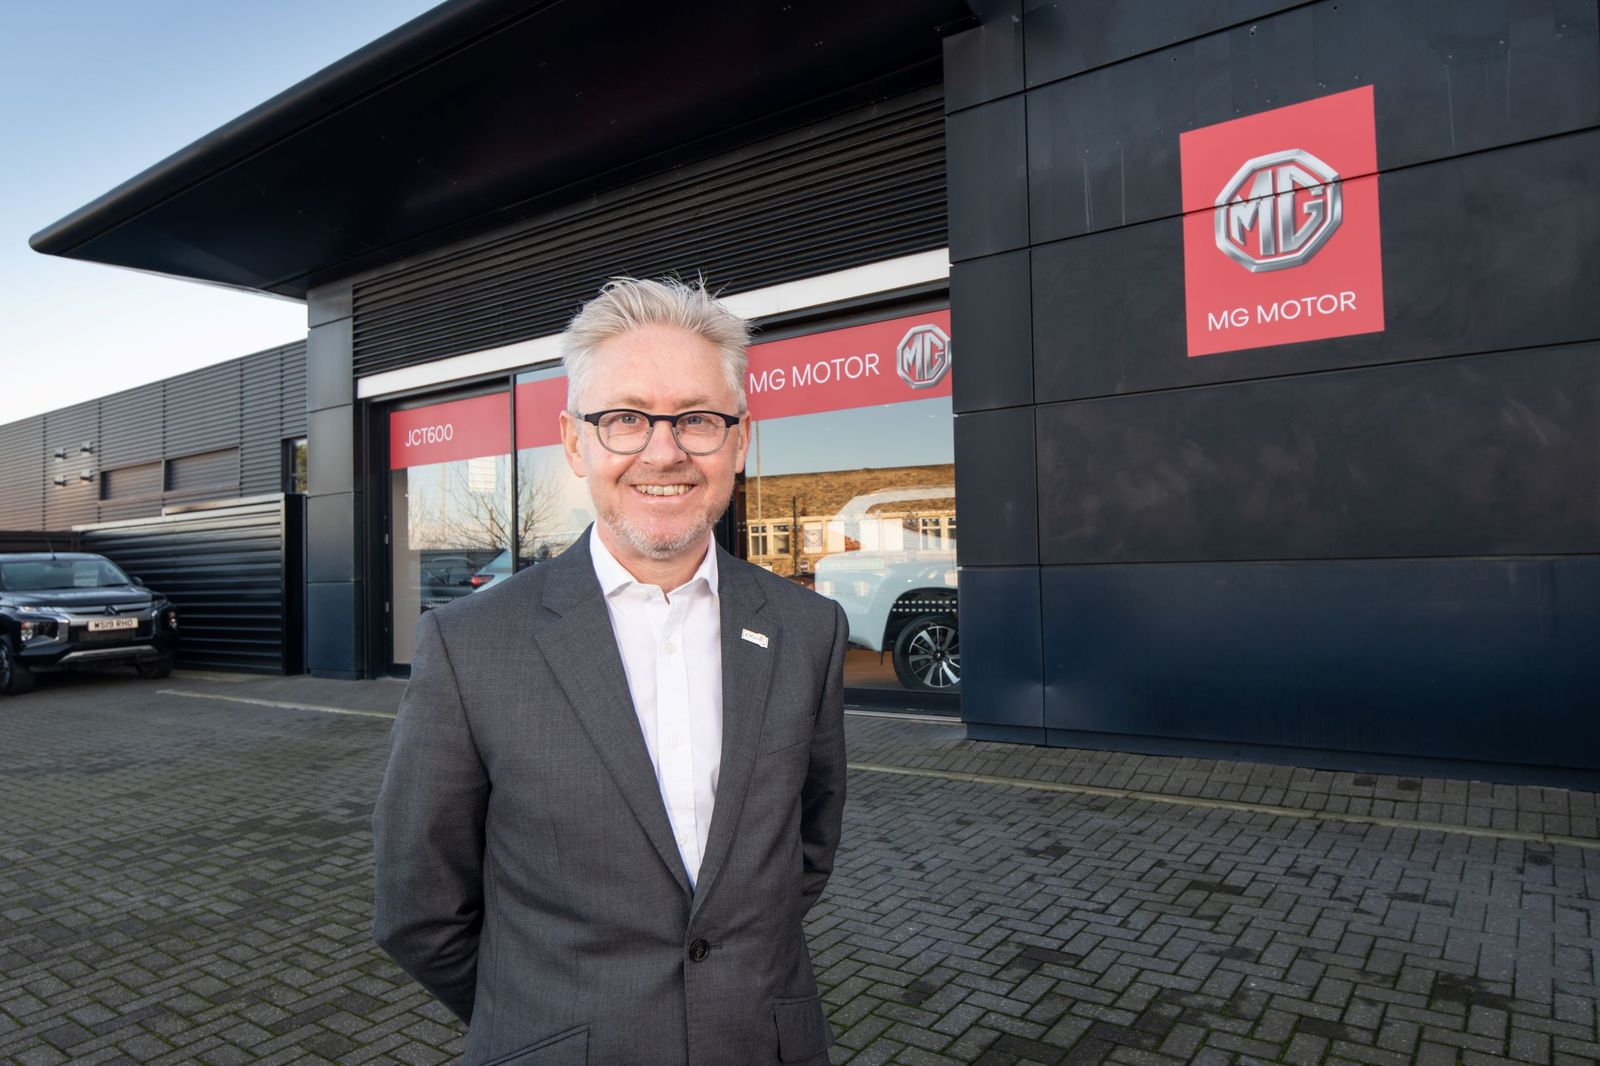 JCT600 adds MG Motor UK to its stable of car marques